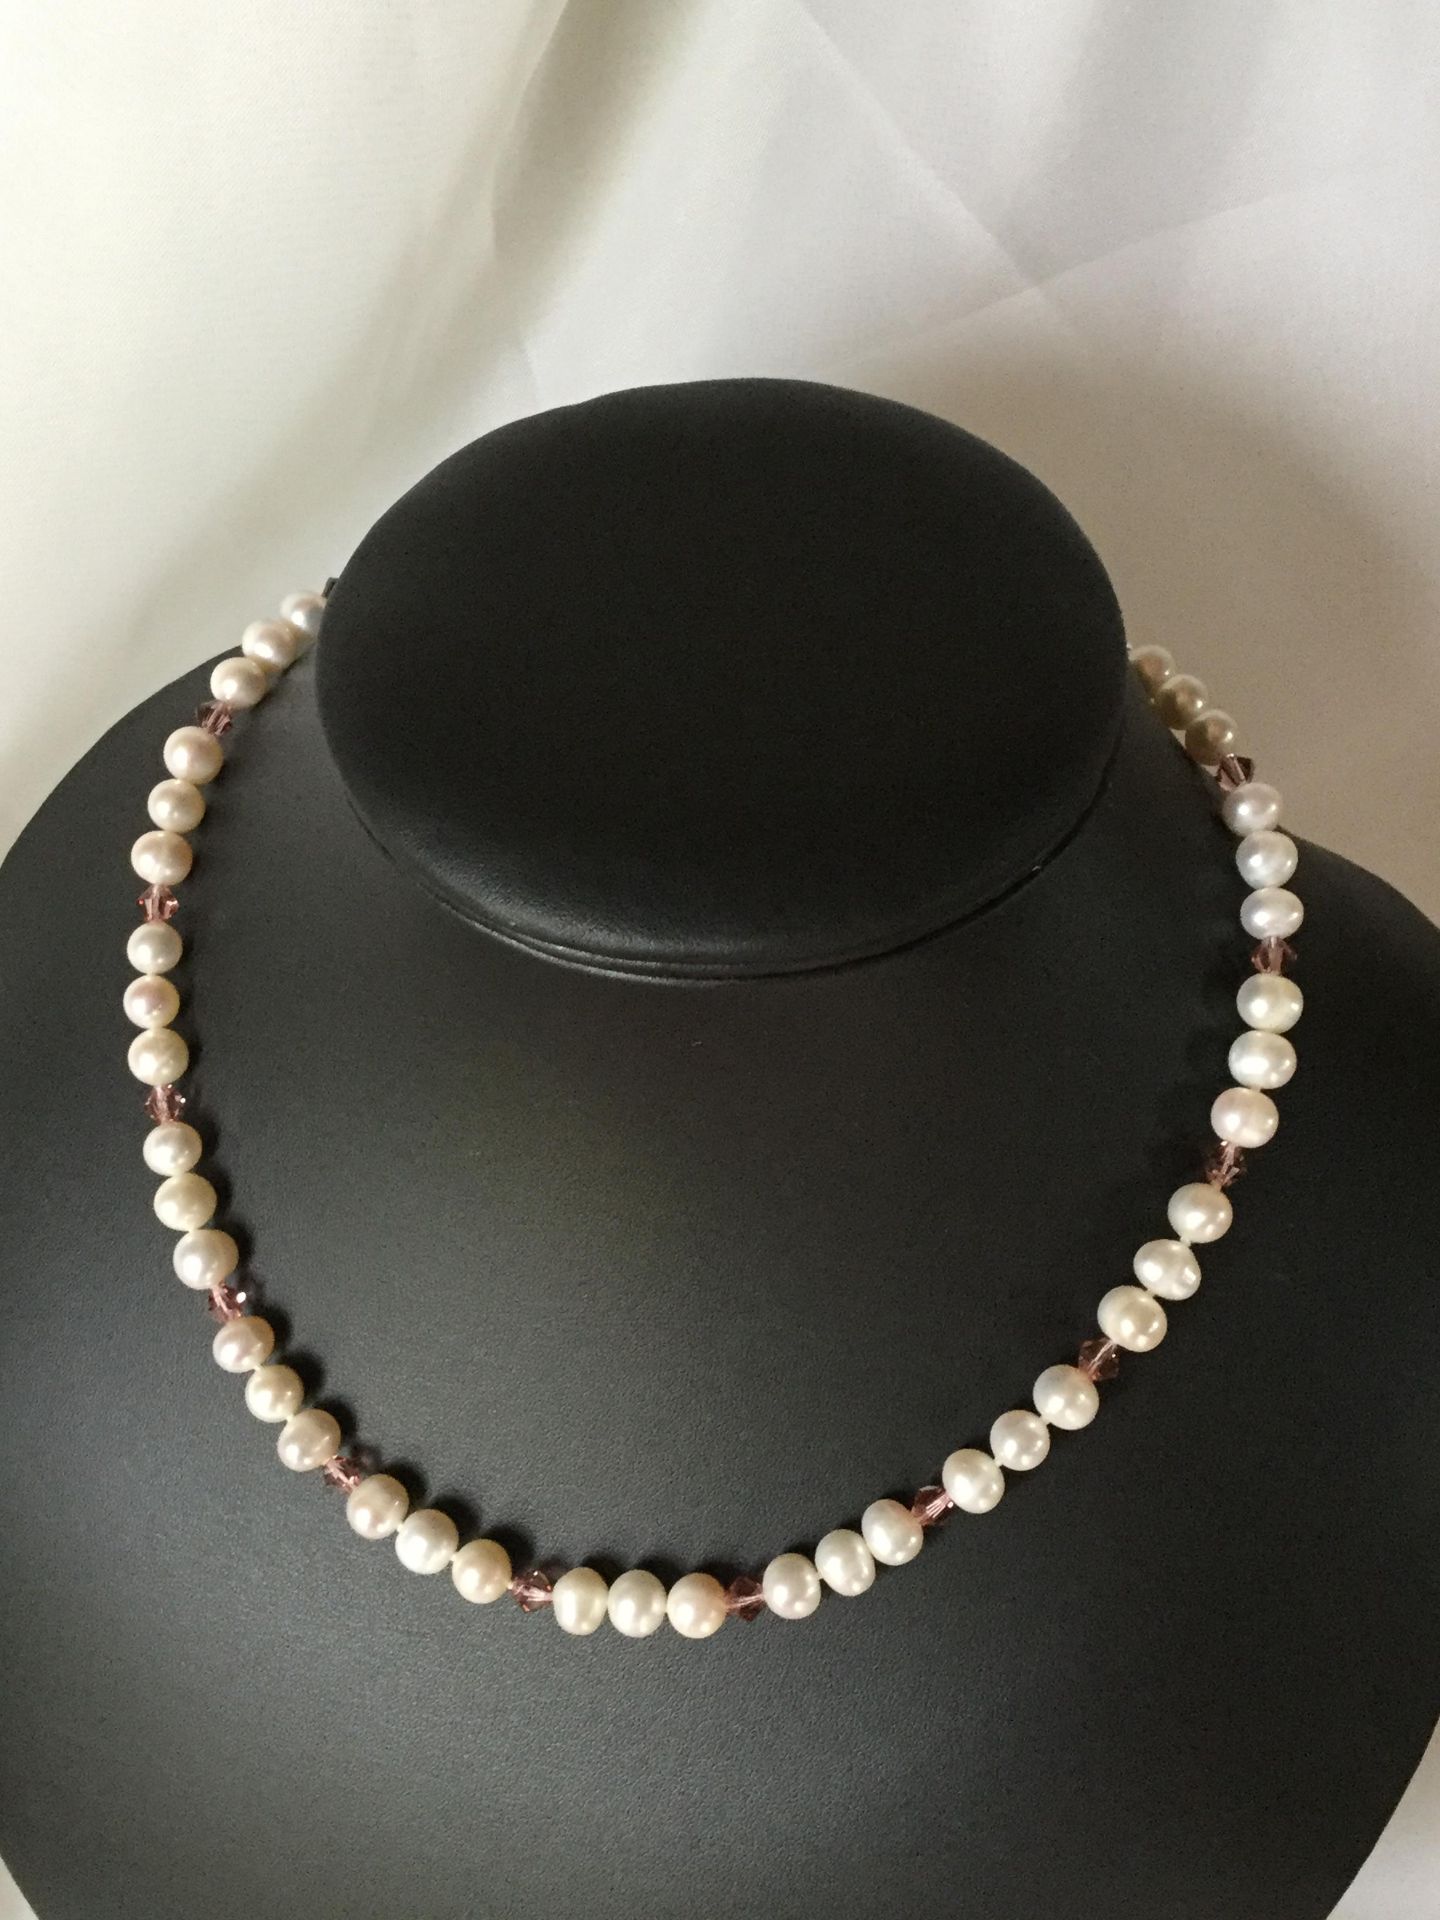 Freshwater Cultured Pearl with Vintage Rose Swarovski éléments necklace 925 silver clasp - Image 7 of 8